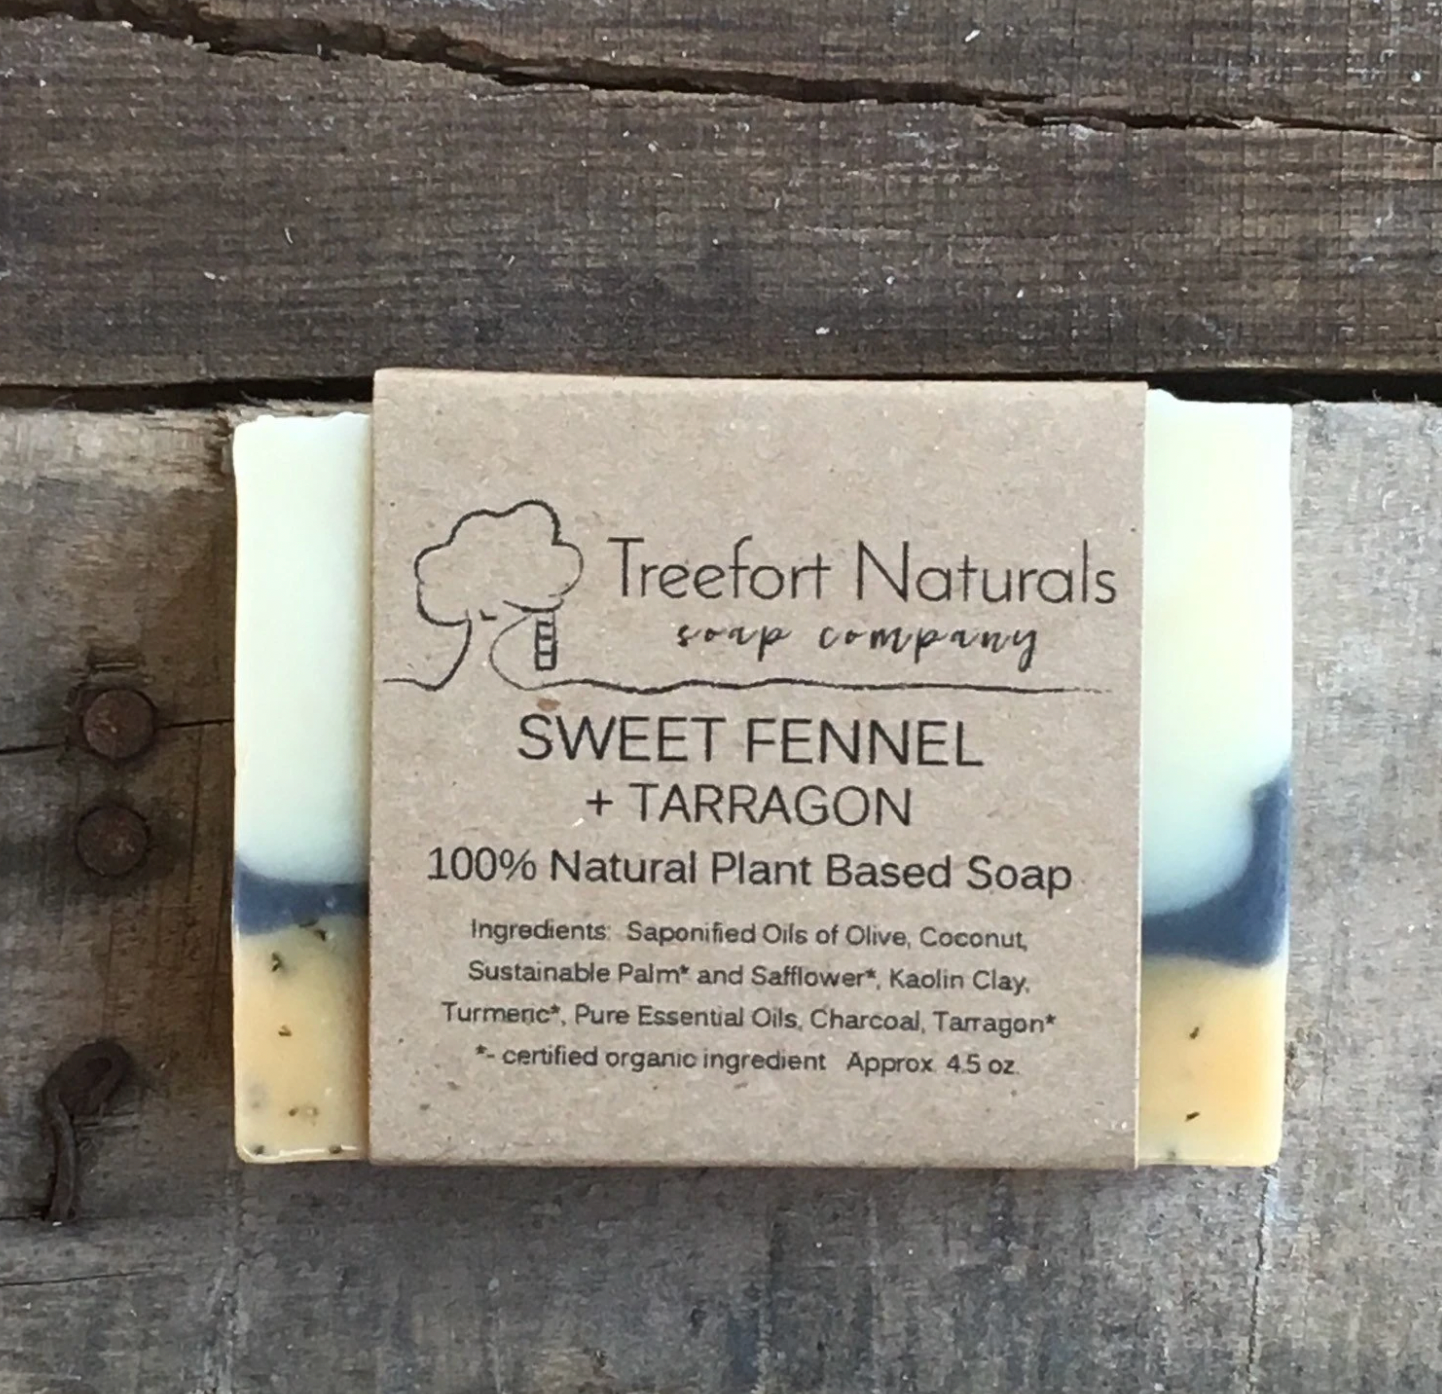 Treefort Naturals Plant-Based Soap | Prelude & Dawn | Los Angeles, CA